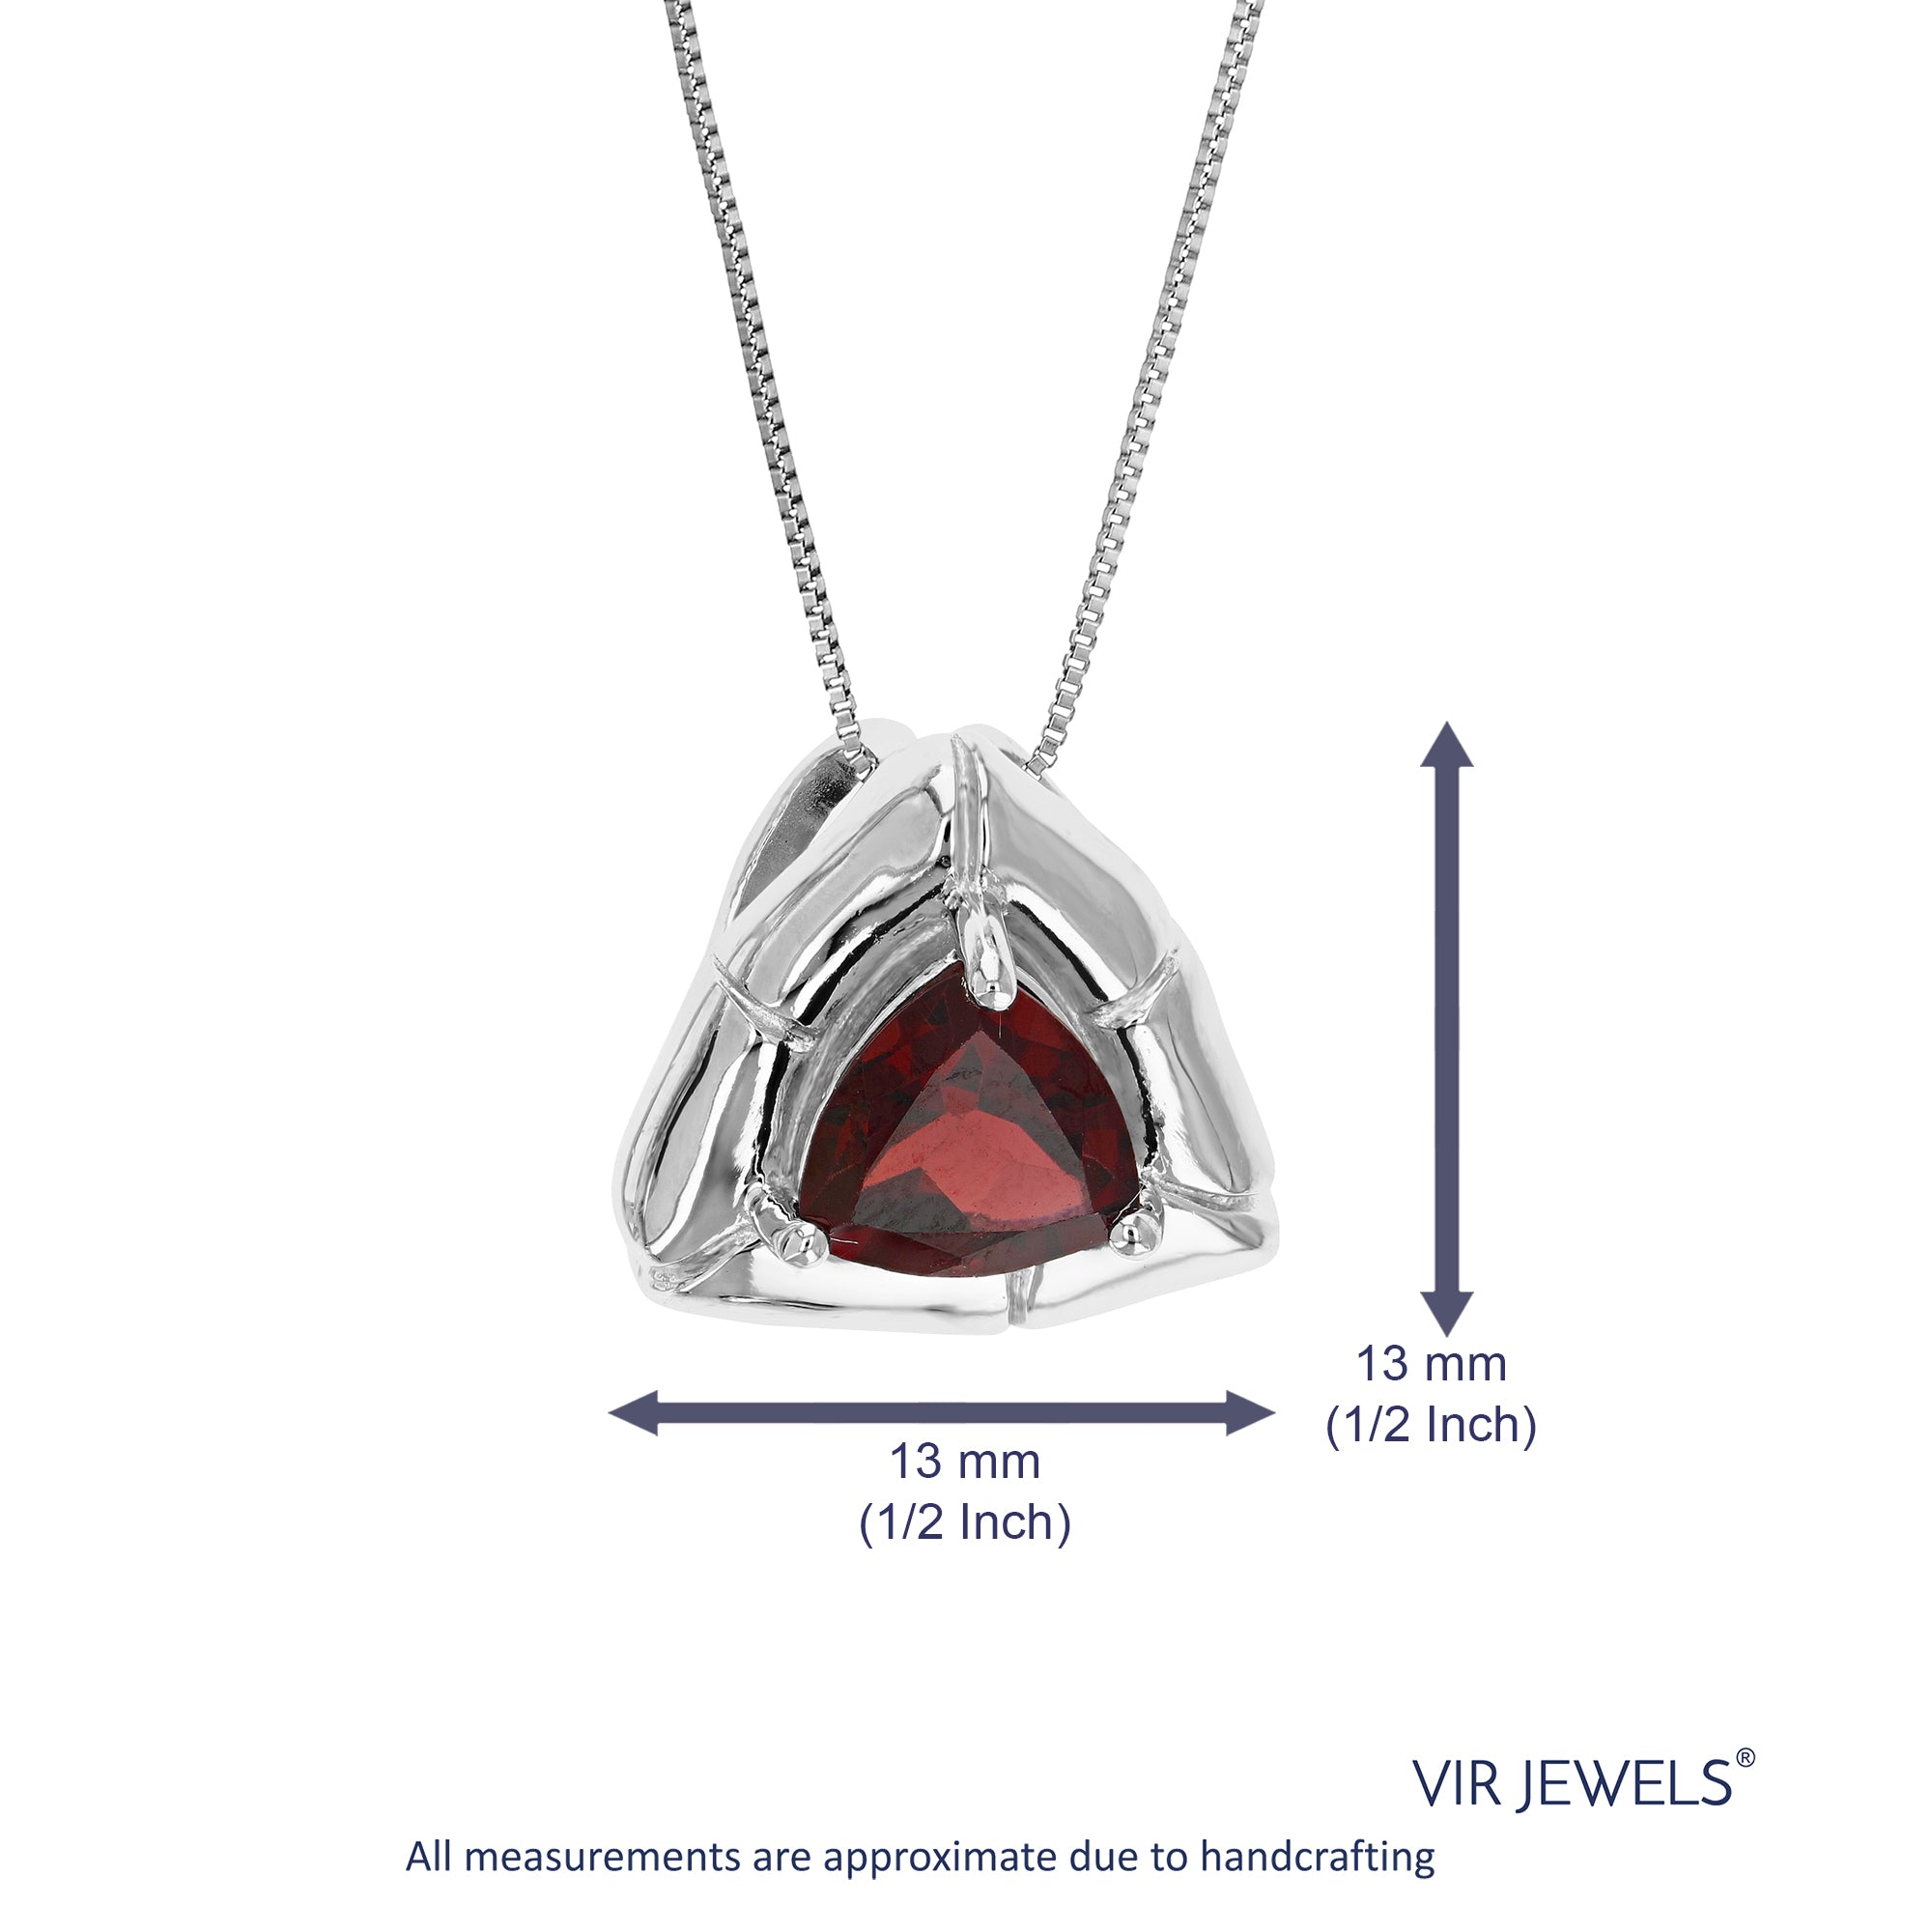 1 cttw Pendant Necklace, Garnet Trillion Shape Pendant Necklace for Women in .925 Sterling Silver with Rhodium, 18 Inch Chain, Prong Setting